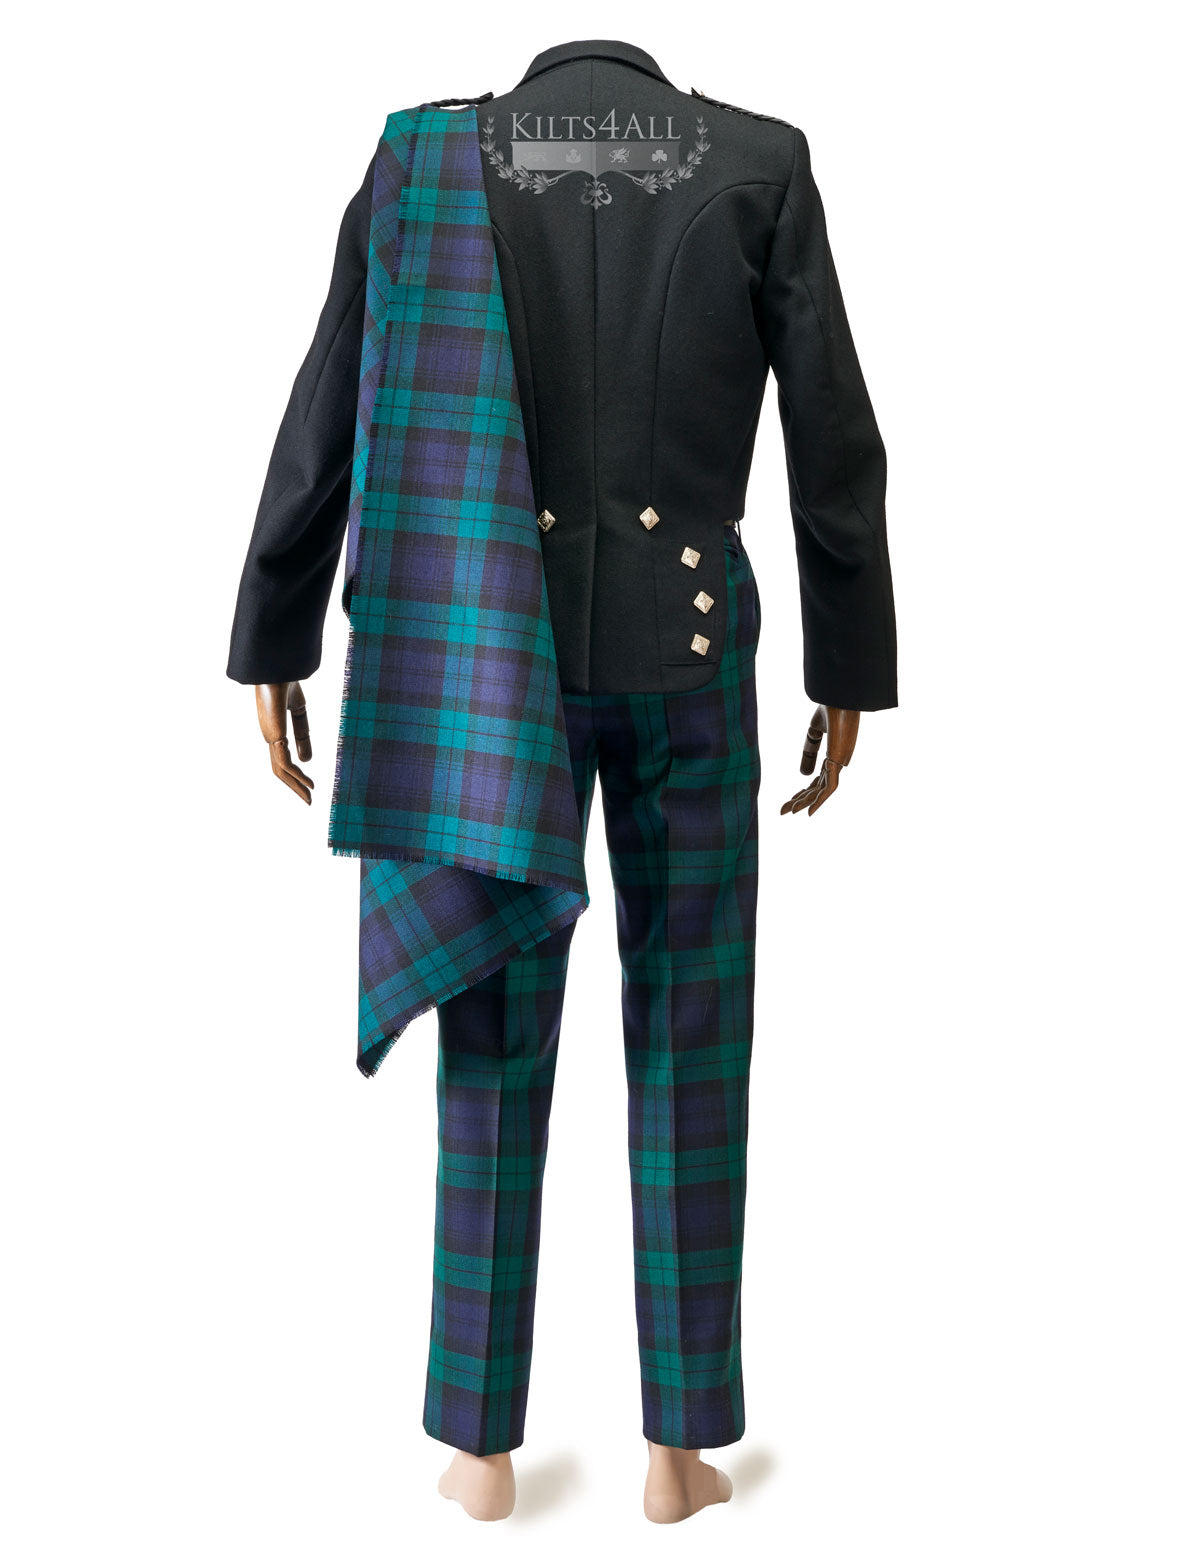 Mens Scottish Tartan Trews Outfit to Hire - Prince Charlie Jacket & 3 Button Waistcoat